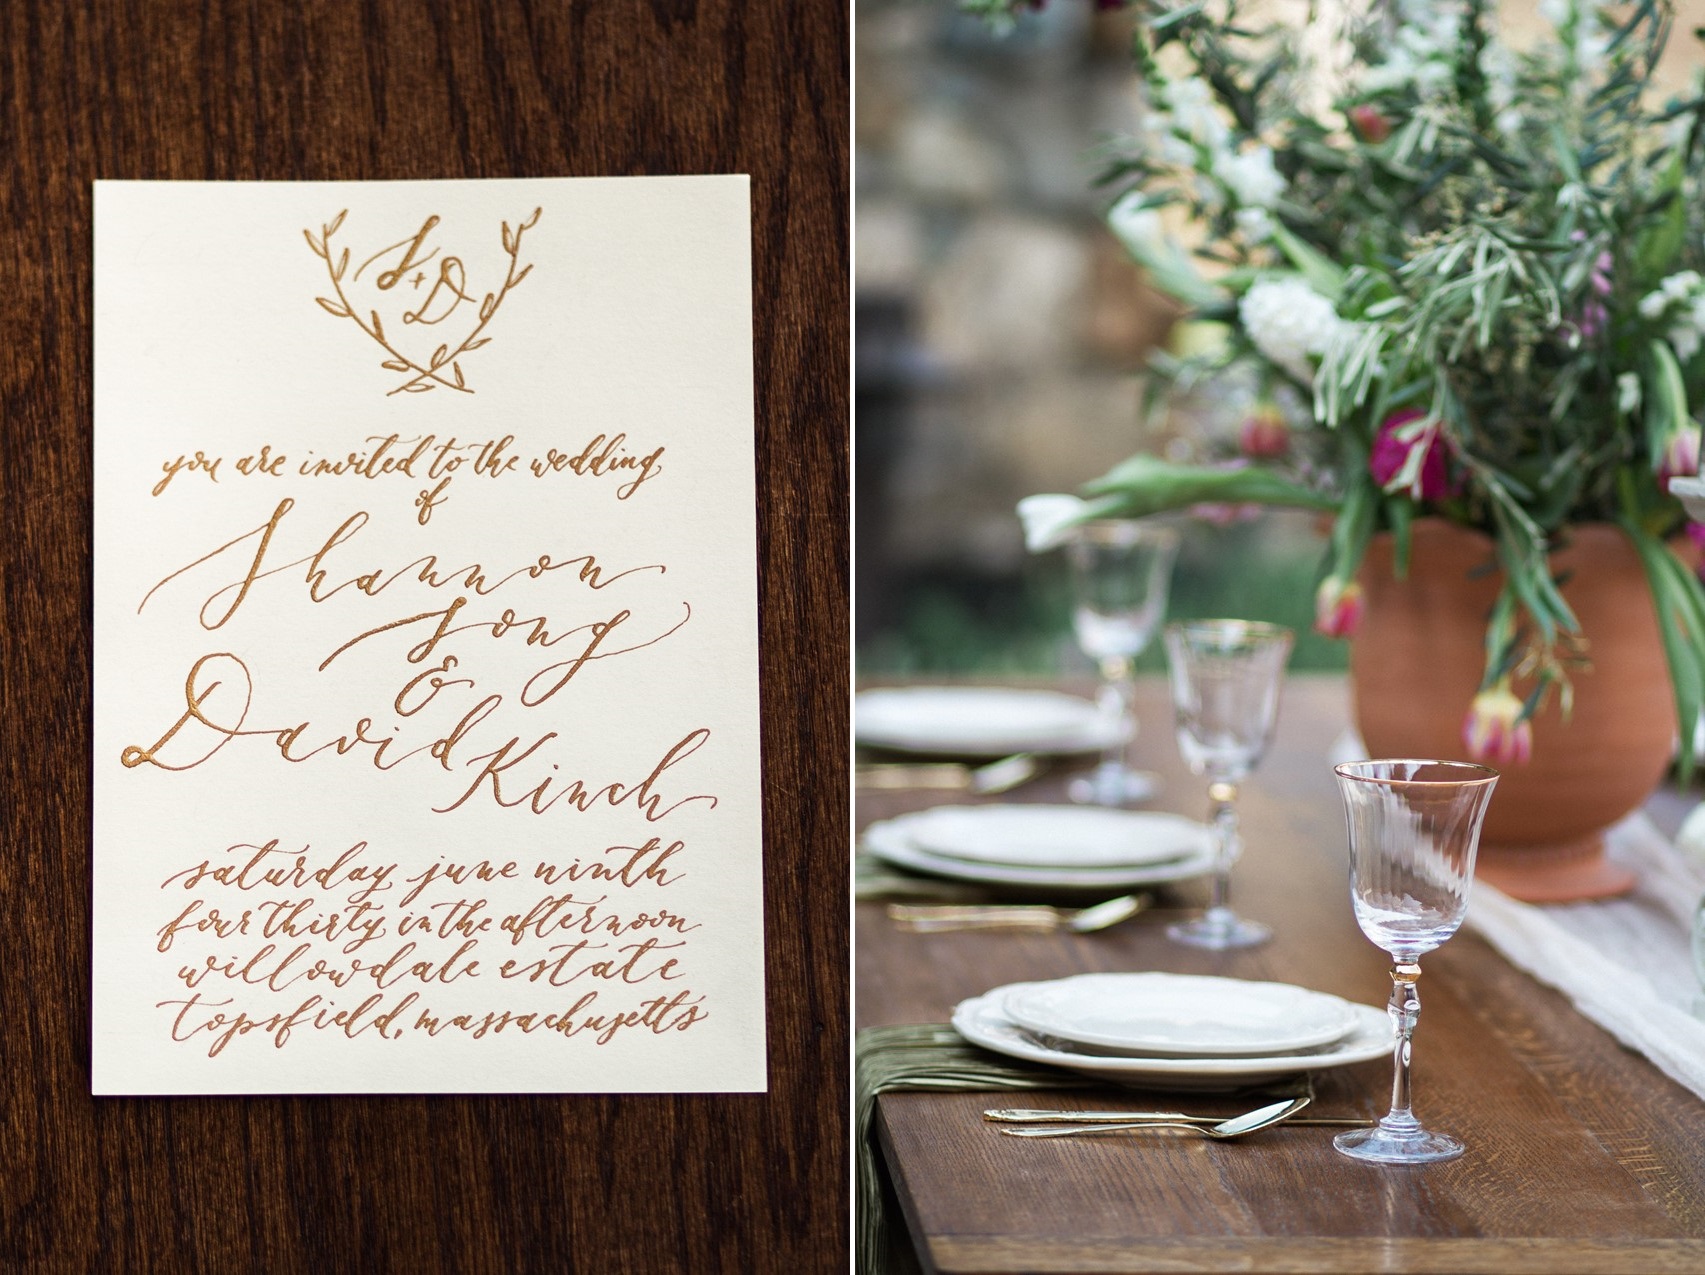 Calligraphy & Tablescape - Romantic Al Fresco Wedding Ideas Inspired by Tuscany